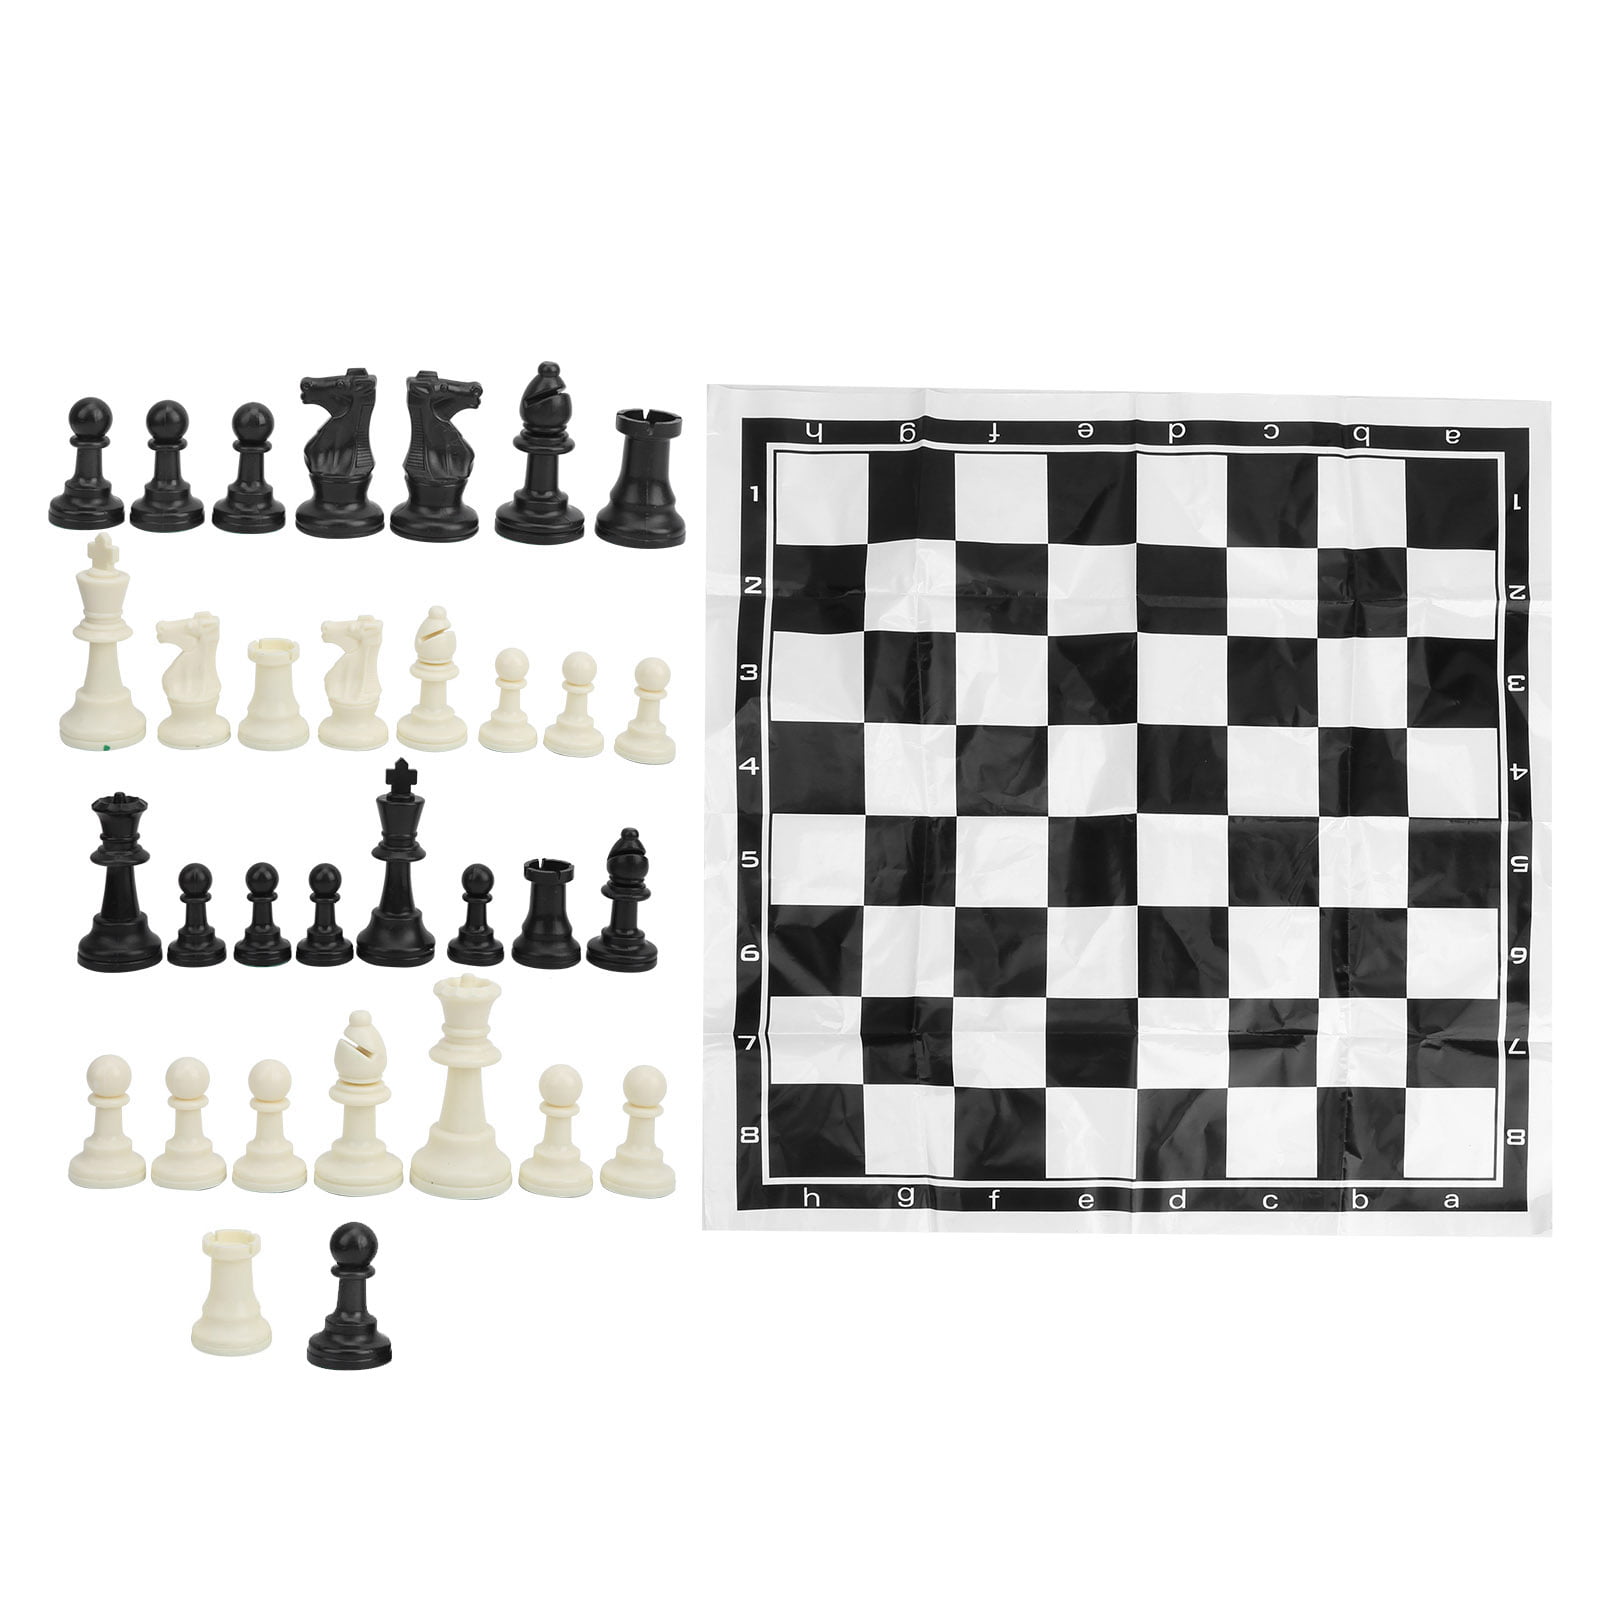 Mind Activity Entertainment Chess Game Top Graded Quality International Chessman 